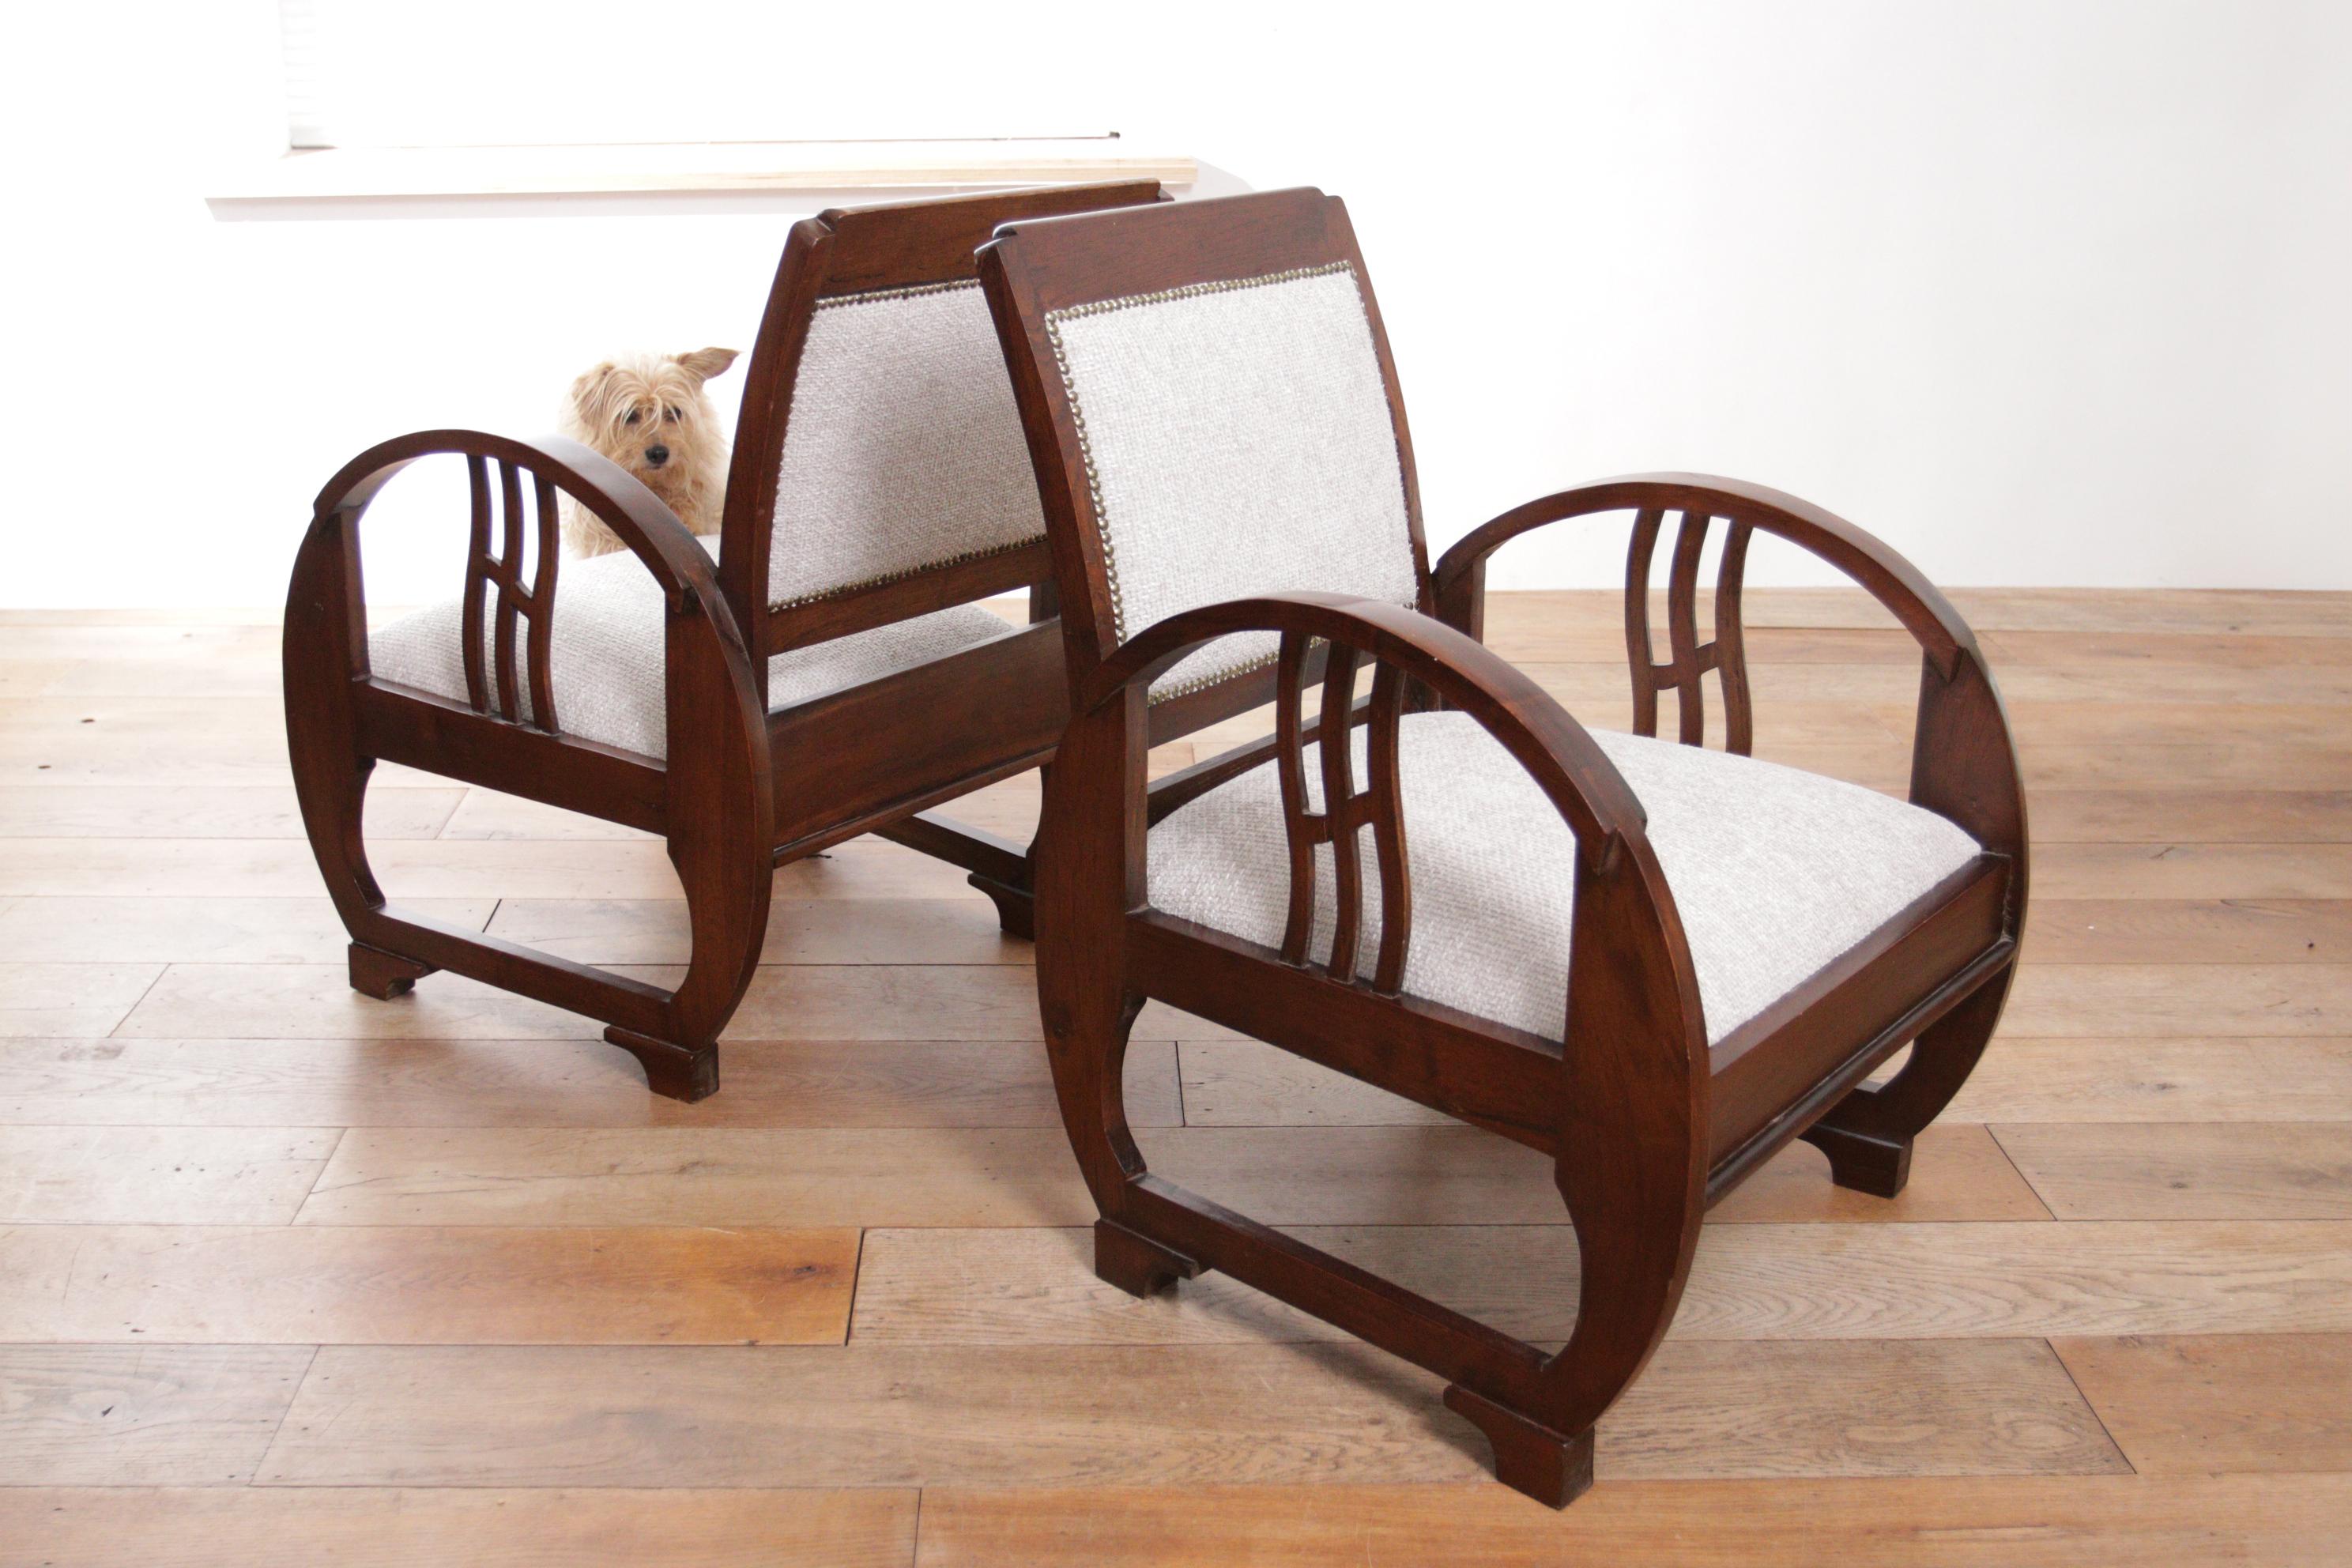 Two Rare Exclusive Elegant Art Deco Vintage French Wooden Armchairs 1930's 2